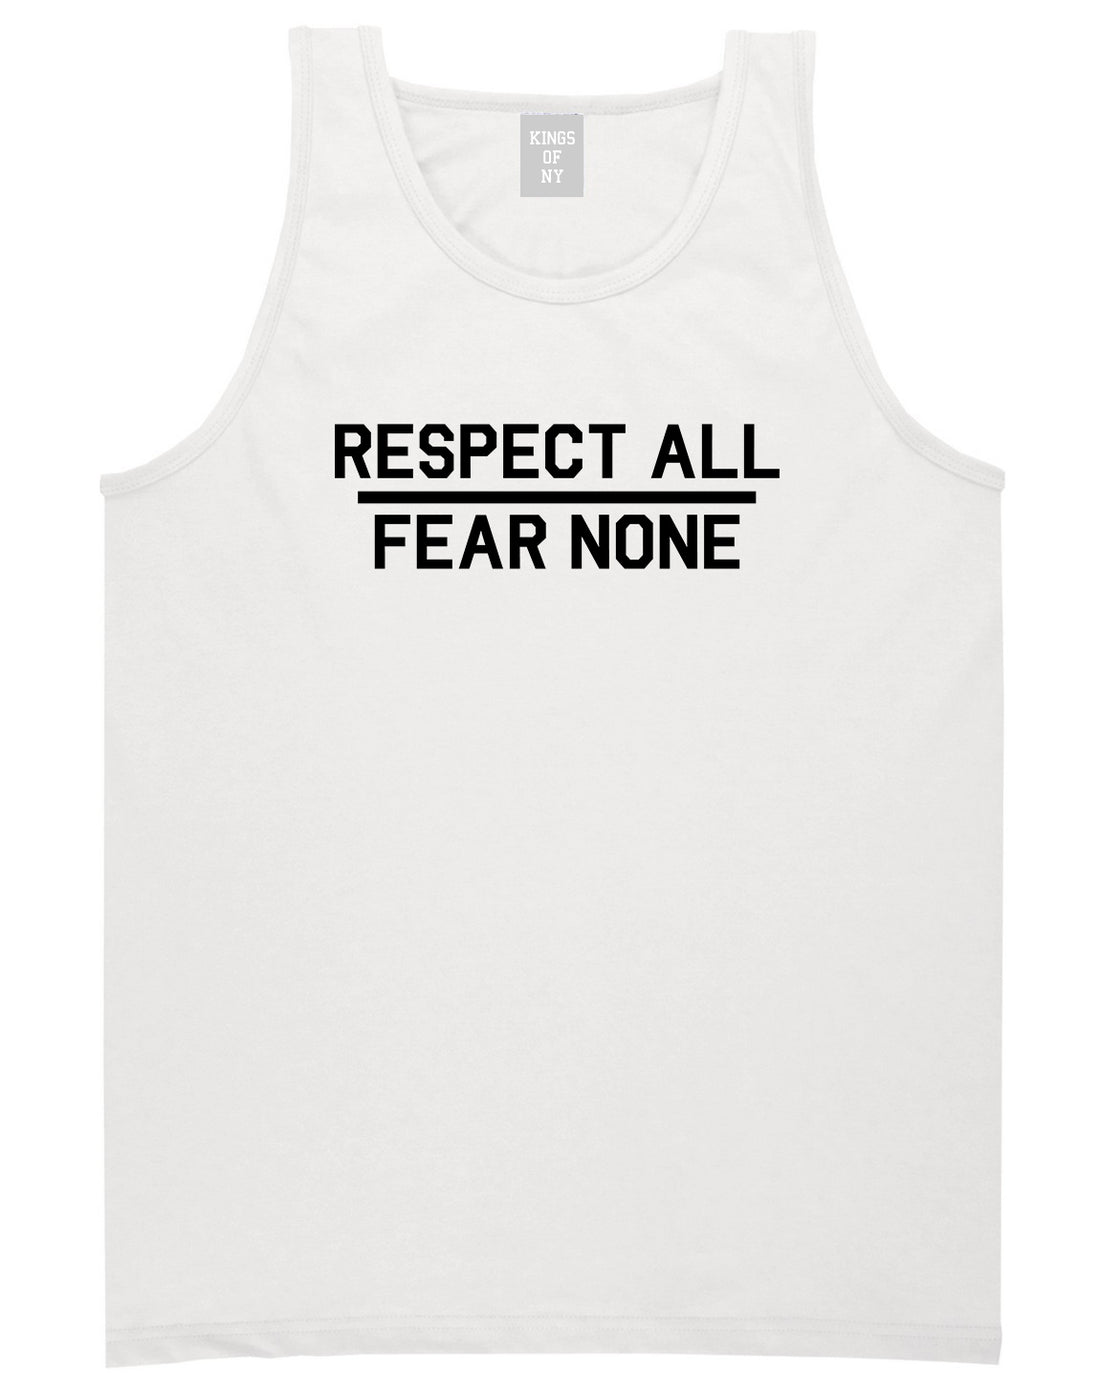 Respect All Fear None Mens Tank Top Shirt White by Kings Of NY